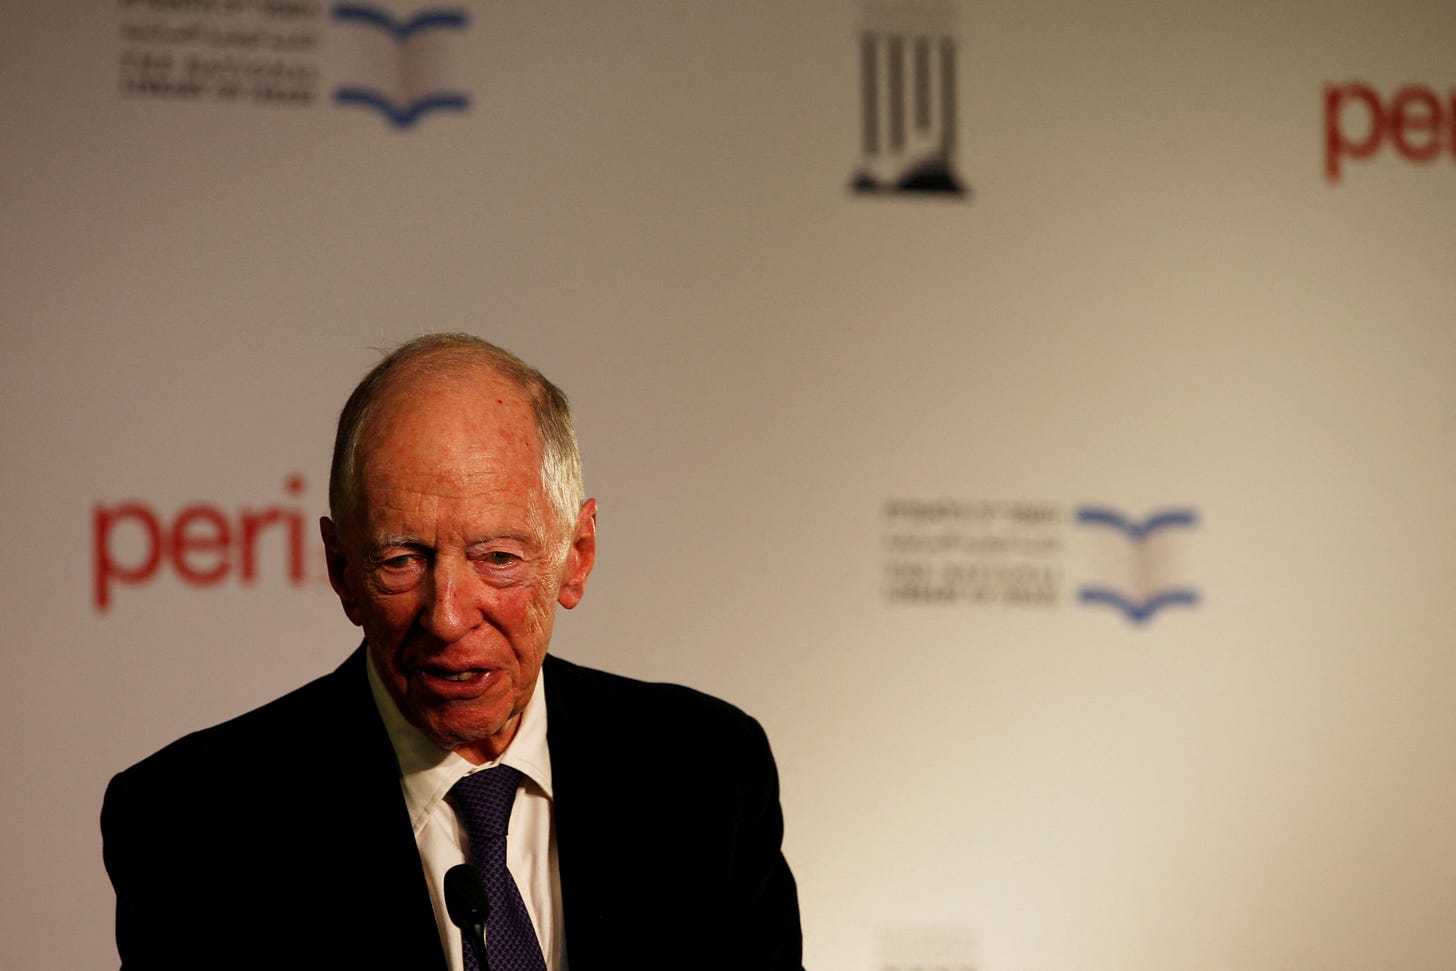 Lord Jacob Rothschild speaks at an event marking the signing of an agreement between the state libraries of Israel and Russia at the National Library of Israel in Jerusalem